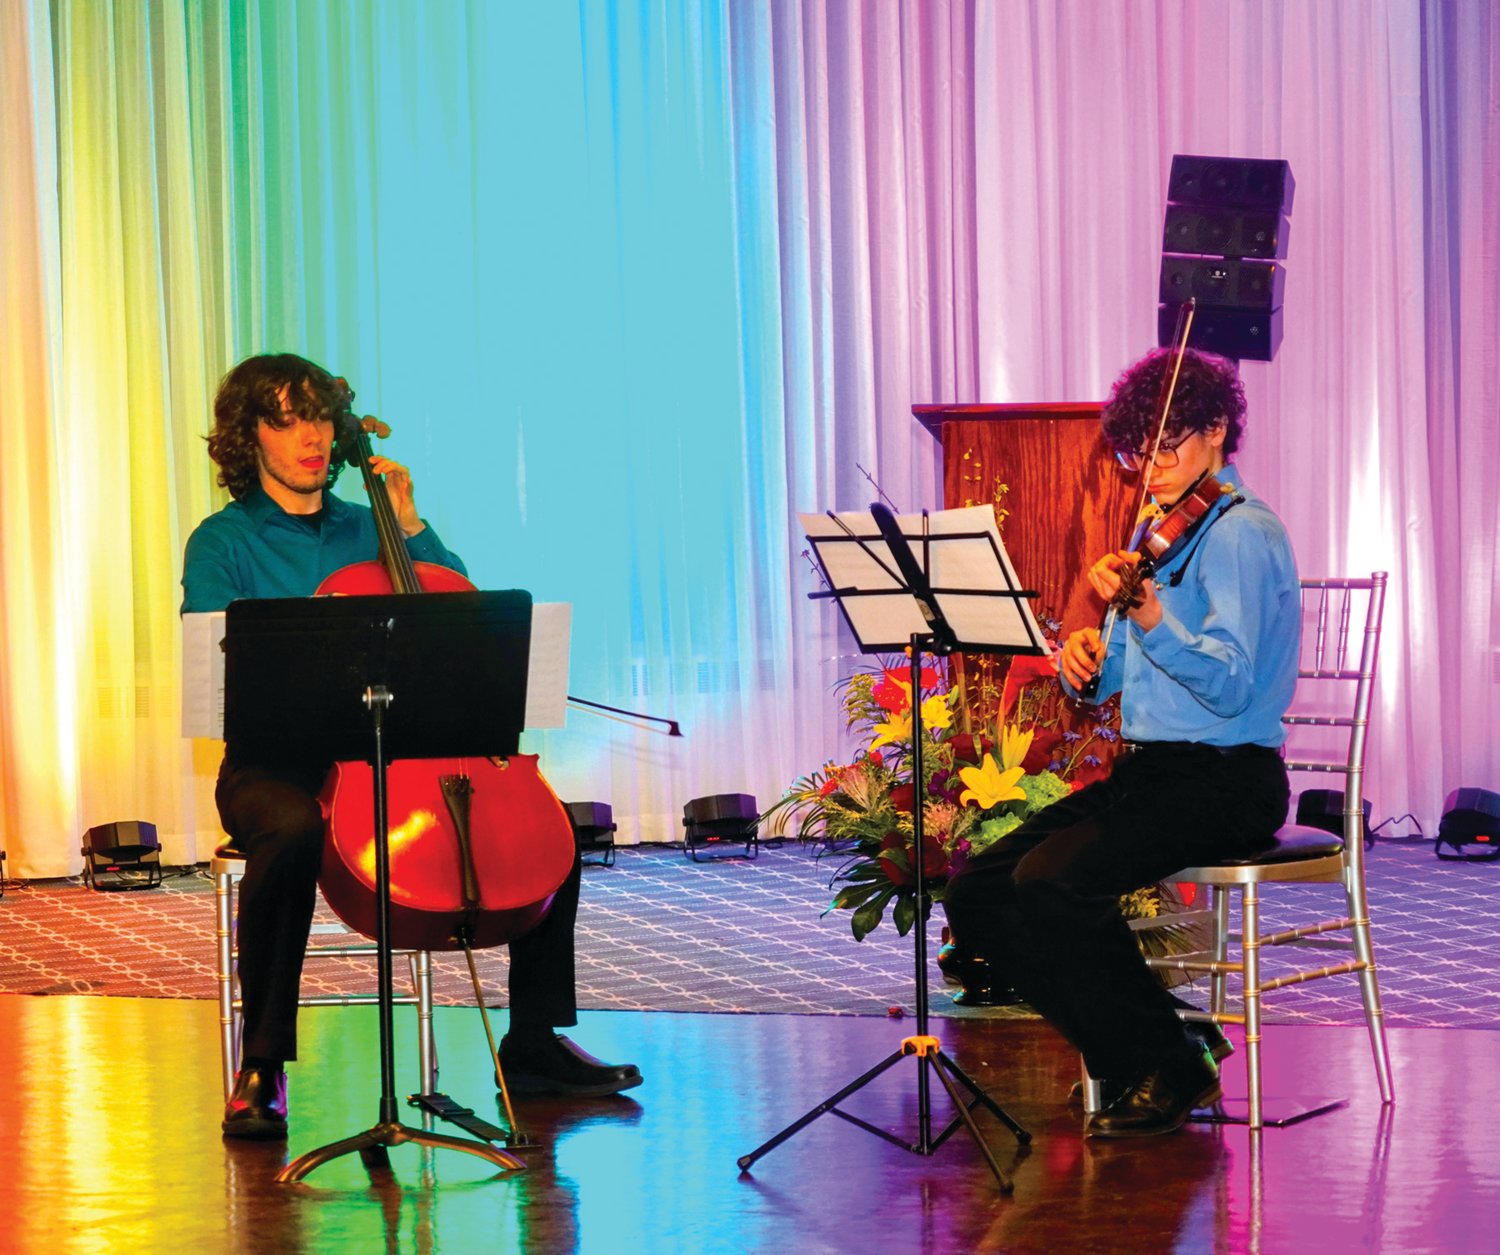 YOBC Honor Strings students Ricky Ridpath, left, and Tony Bello perform at the Youth Orchestra’s annual benefit.